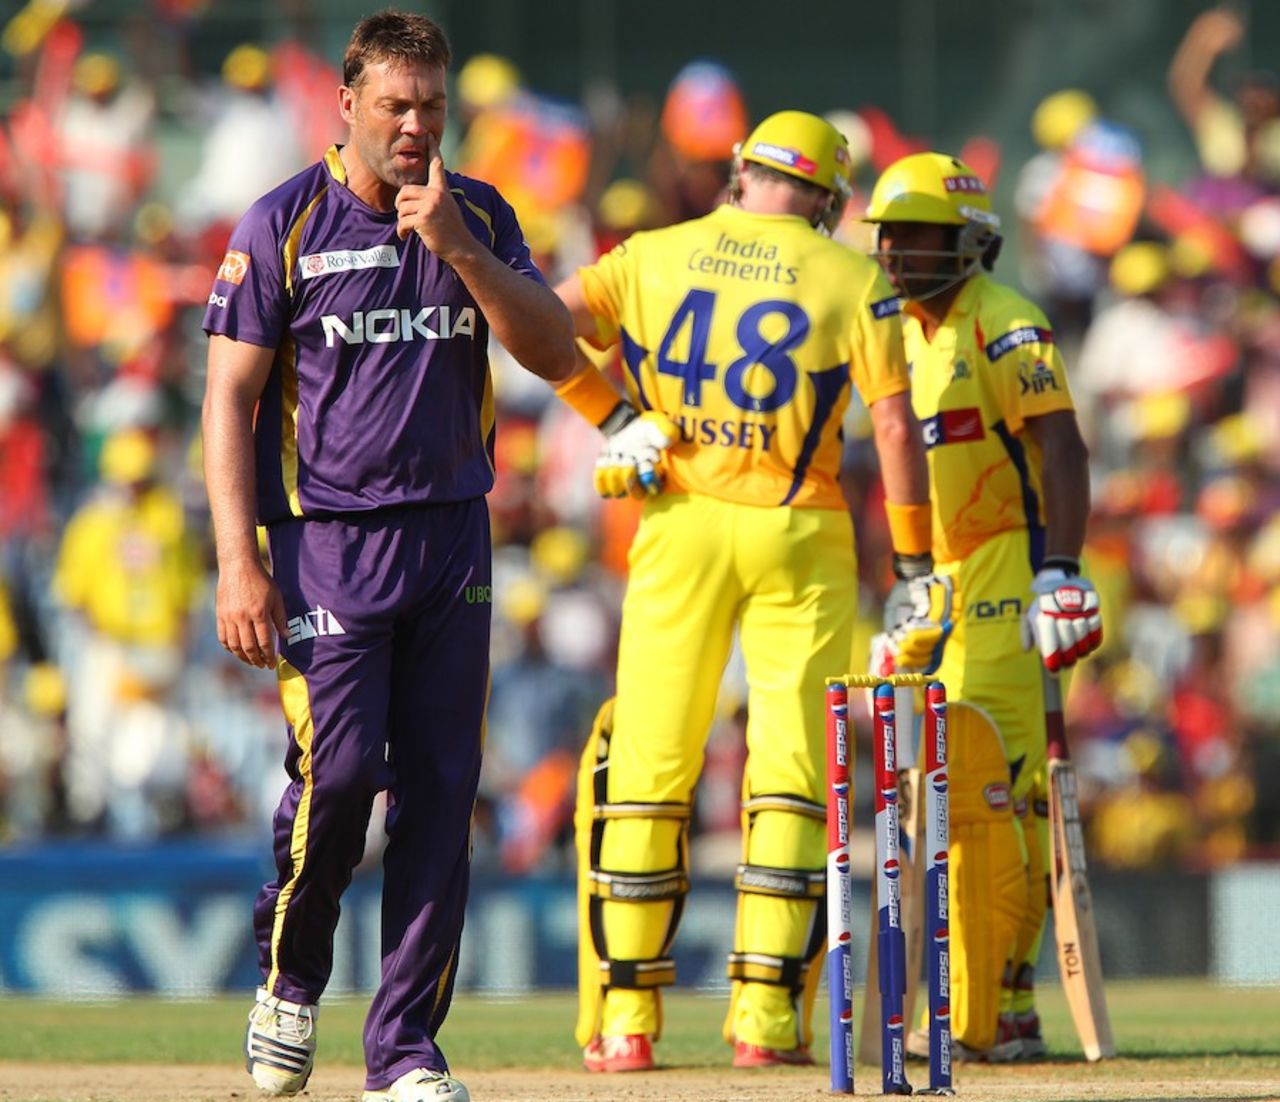 Jacques Kallis conceded 32 in his first two overs, Chennai Super Kings v Kolkata Knight Riders, IPL, Chennai, April 28, 2013